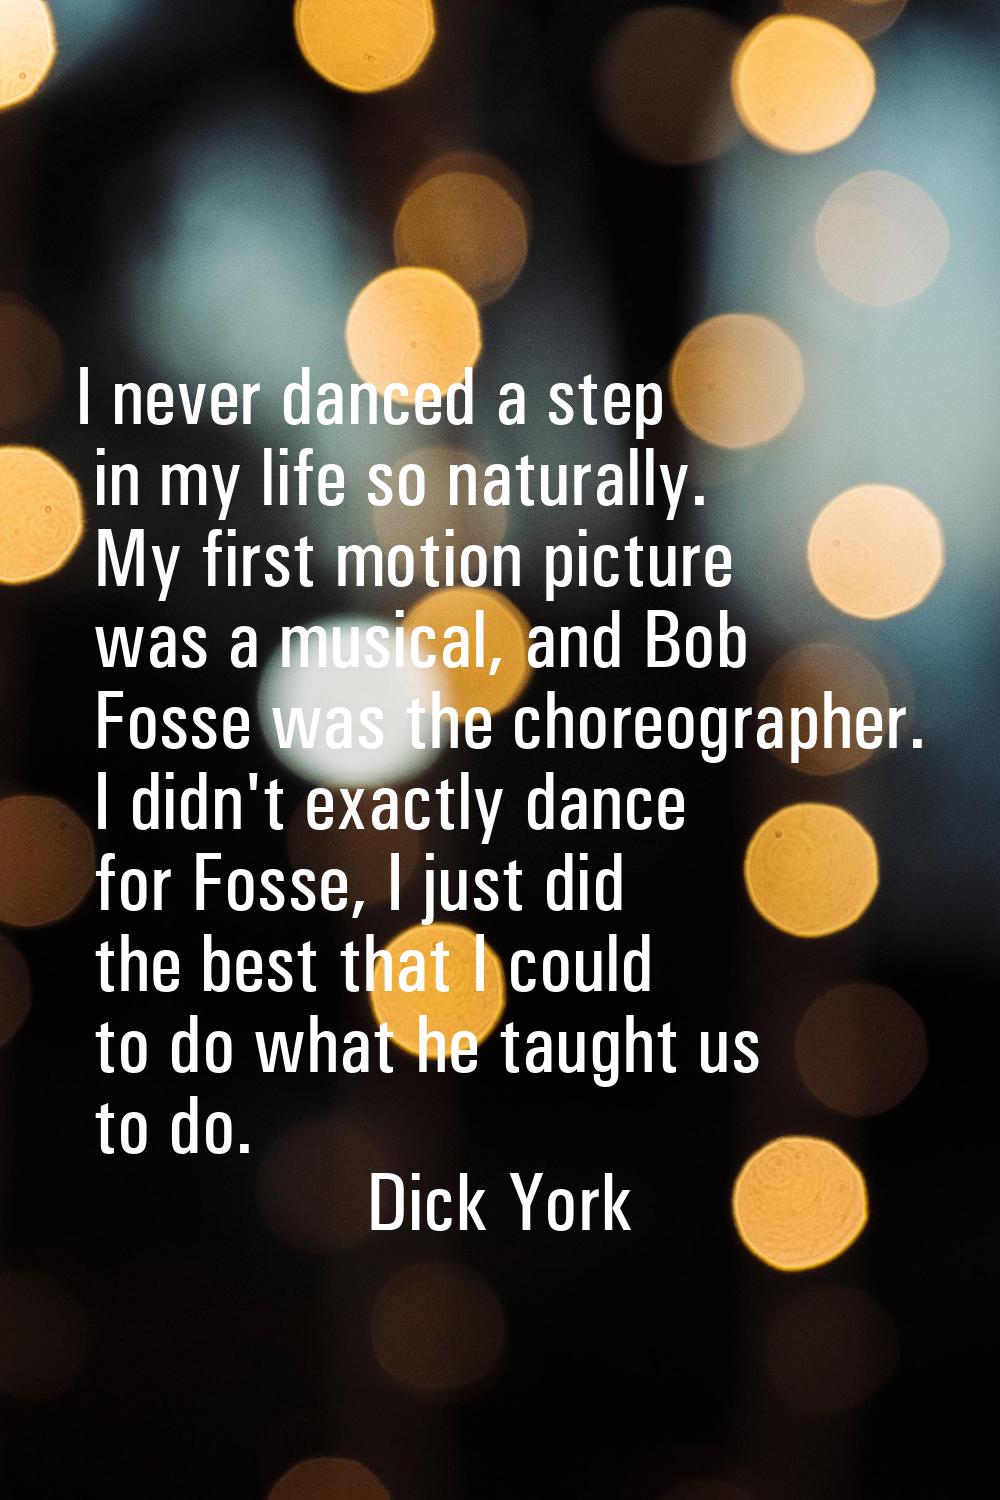 I never danced a step in my life so naturally. My first motion picture was a musical, and Bob Fosse